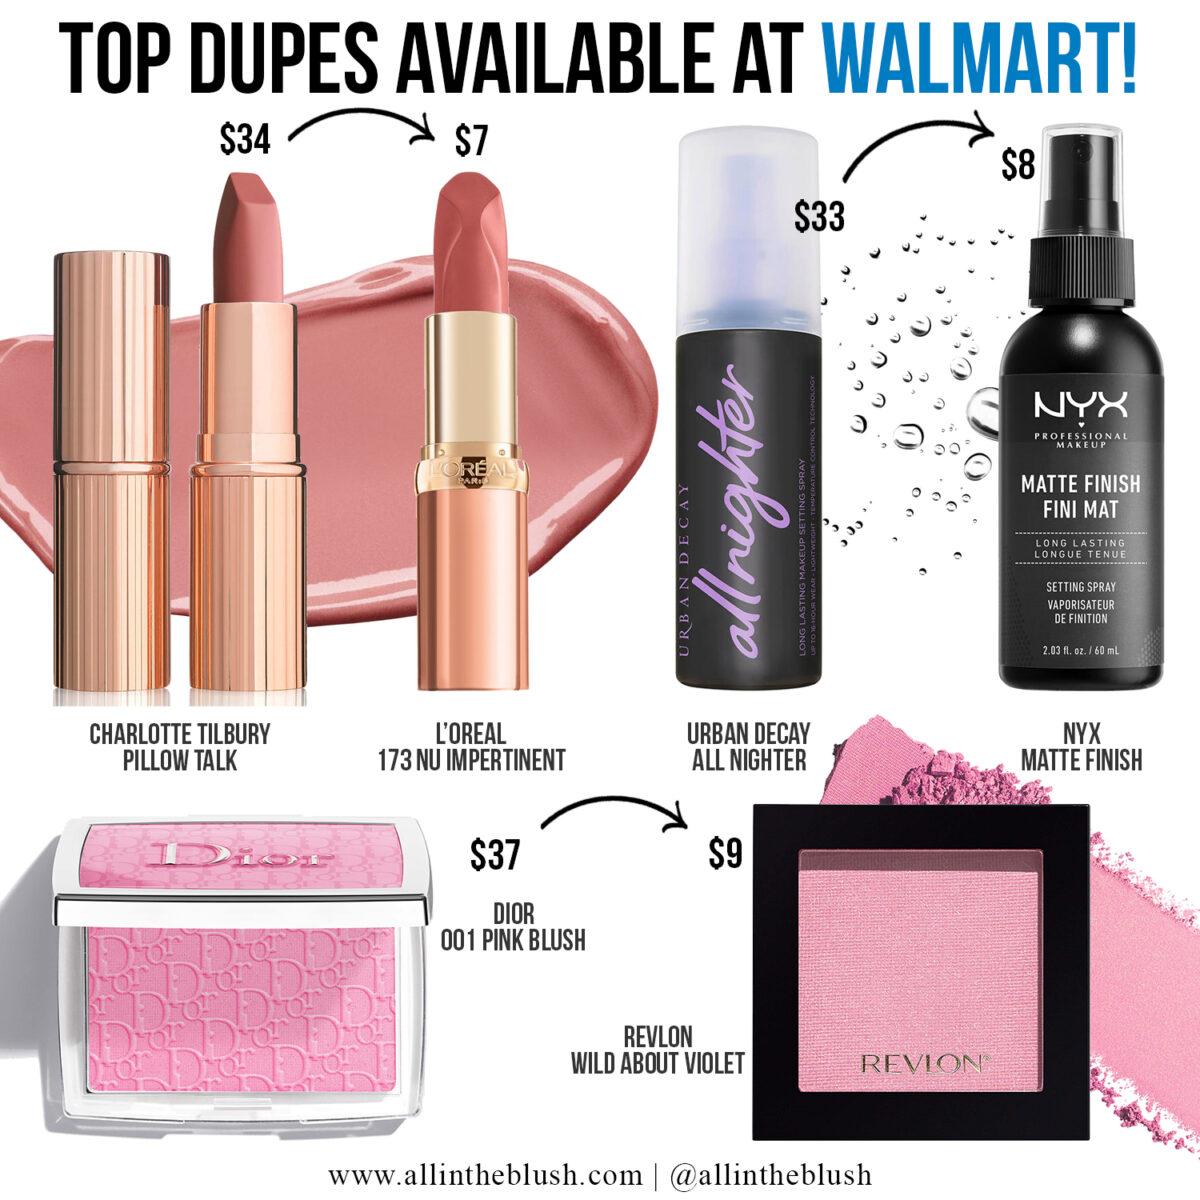 Top Dupes Available at Walmart!